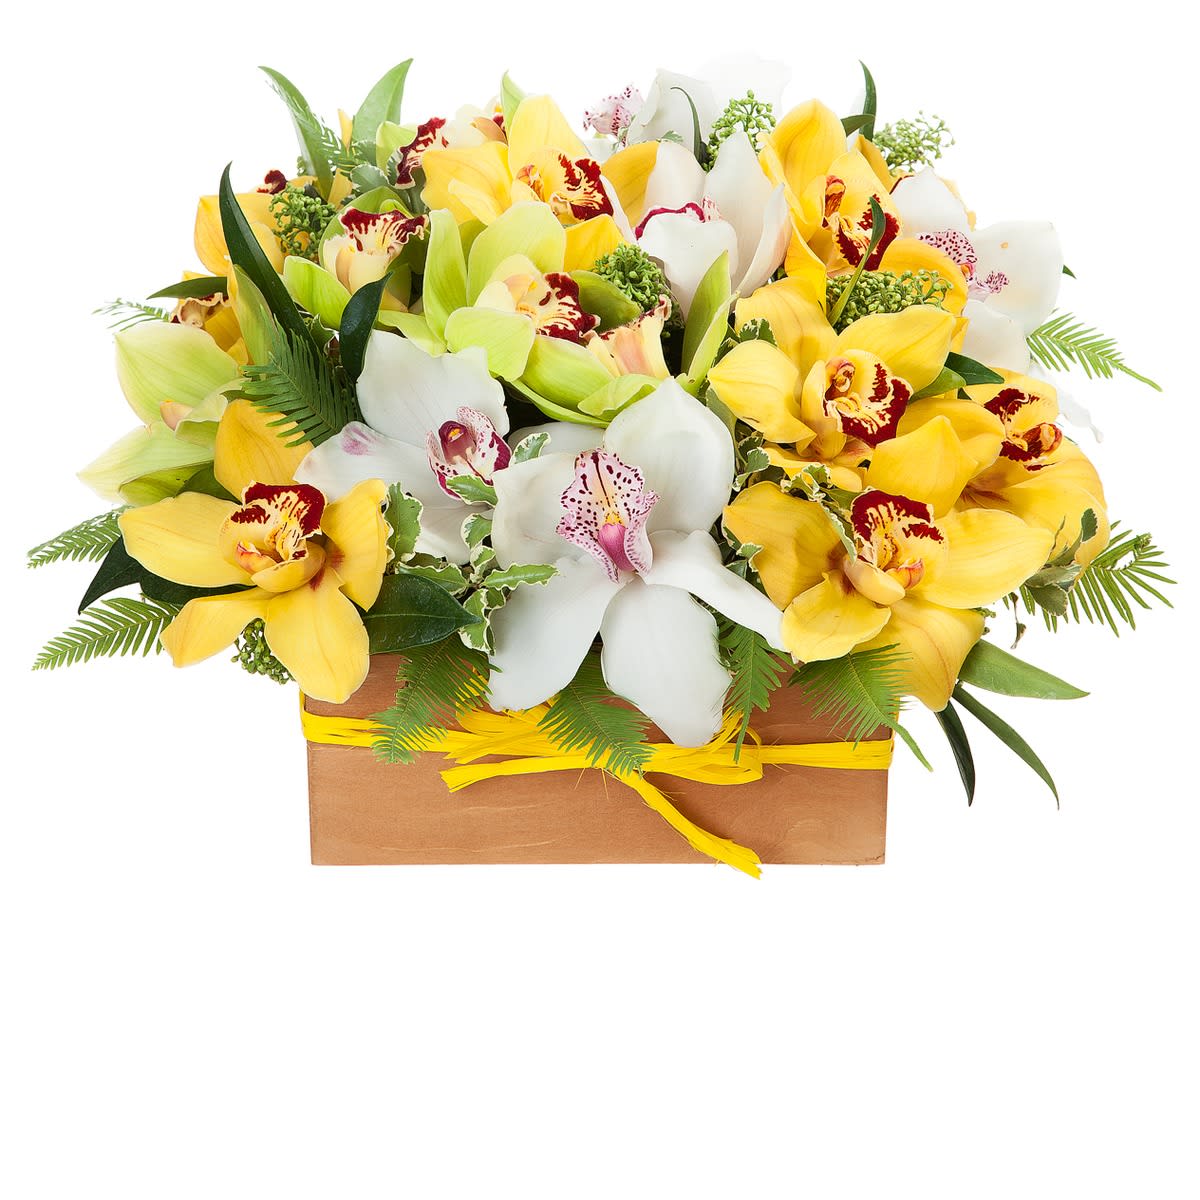 Cymbidium Orchids  Floral Arrangement - Send your recipient a high end bouquet of vibrant jade green cymbidium orchids, known for their longevity and exquisite beauty. In this luxury flower arrangement stunning orchids are hand-arranged with assorted lush tropical greens to create an incredible floral expression of your most heartfelt wishes. 